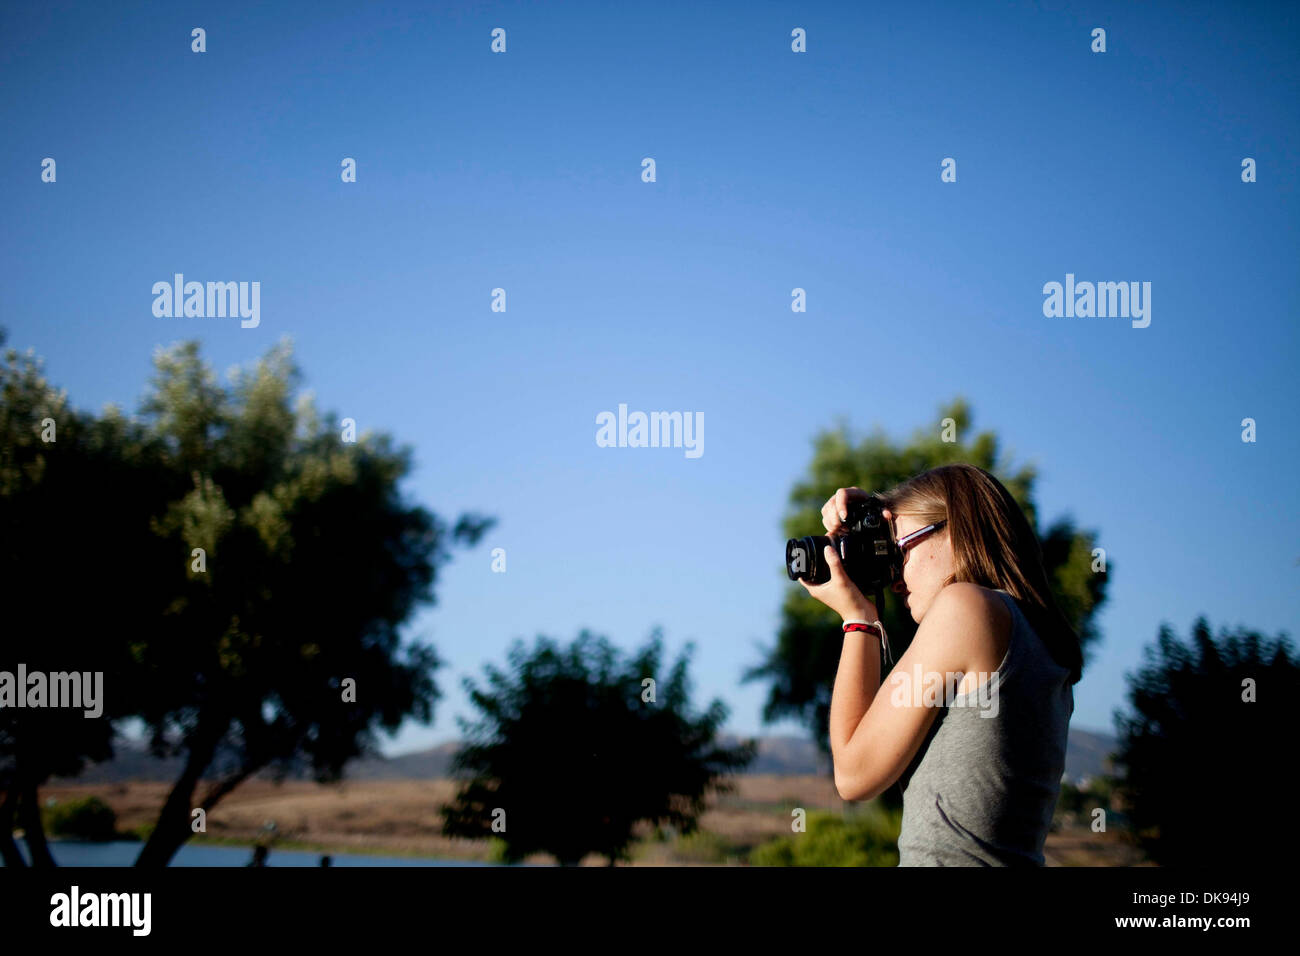 Ne4 High Resolution Stock Photography and Images - Alamy